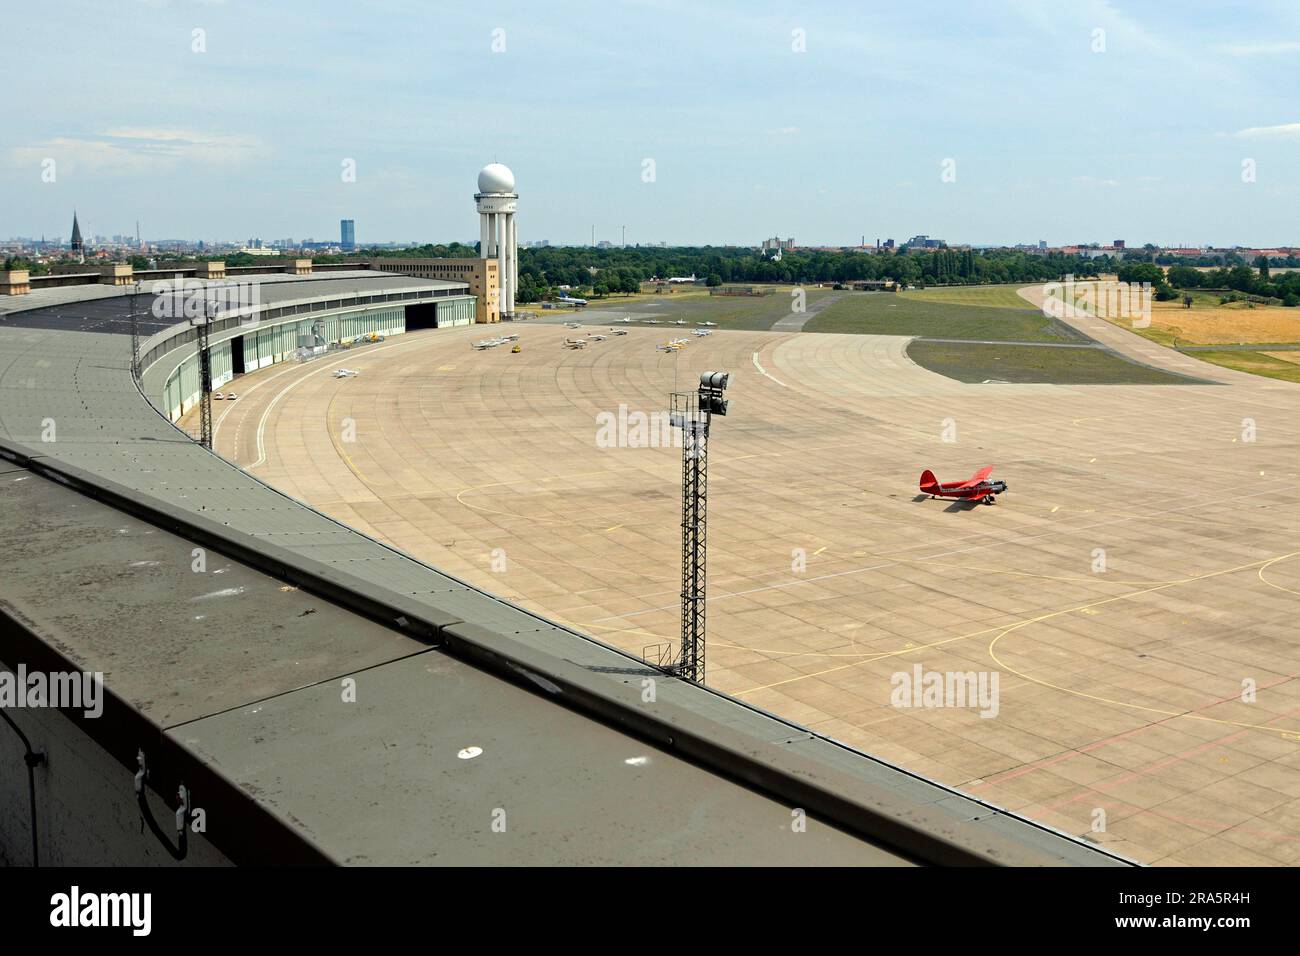 Aircraft on taxiway and airport building, Tempelhof Airport, Berlin, Germany, central airport, taxiway Stock Photo